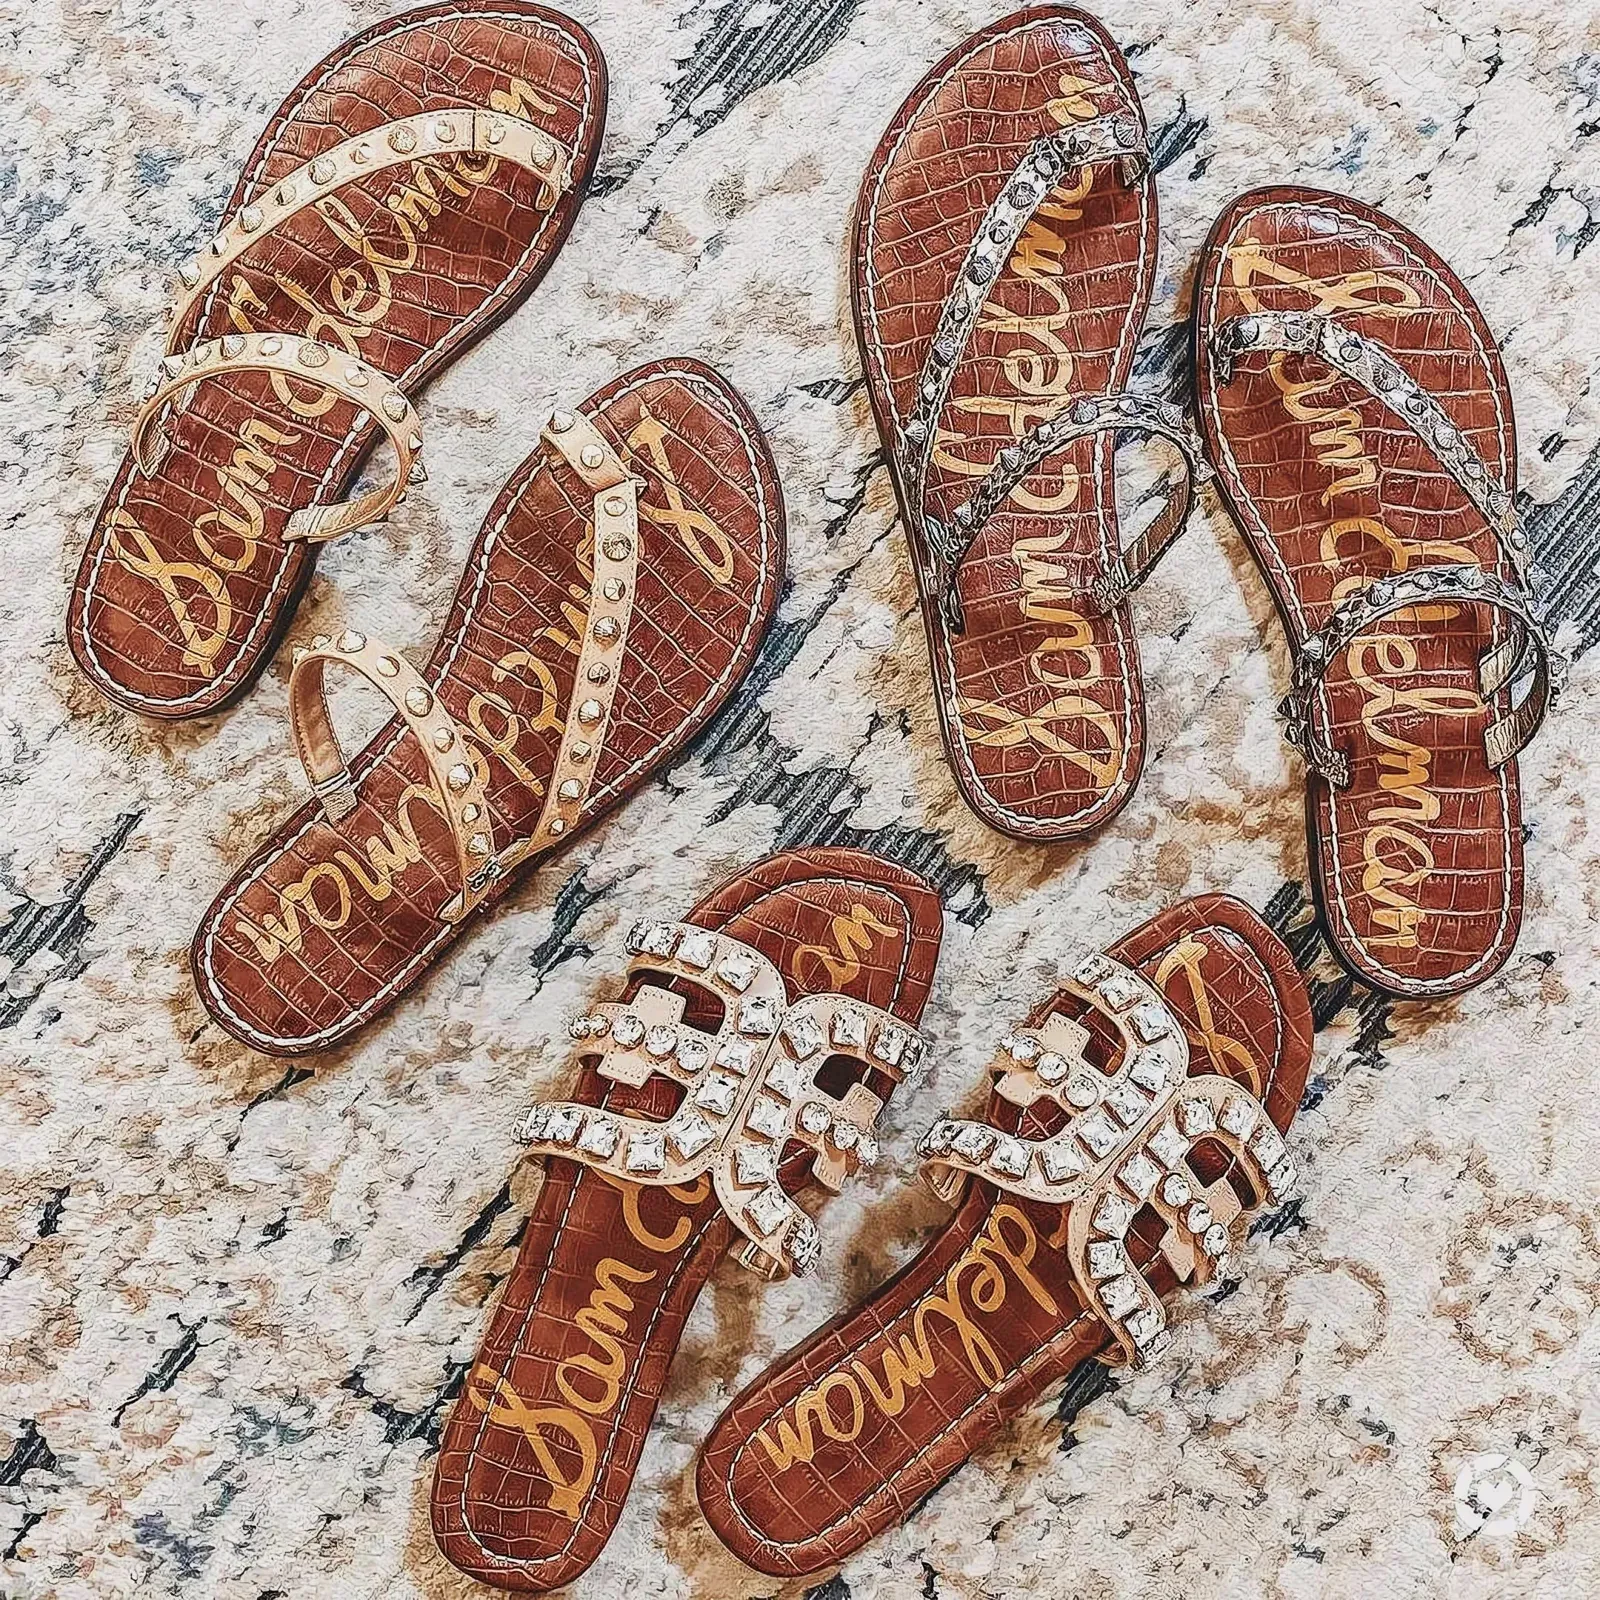 Various studded sandals on a carpeted surface